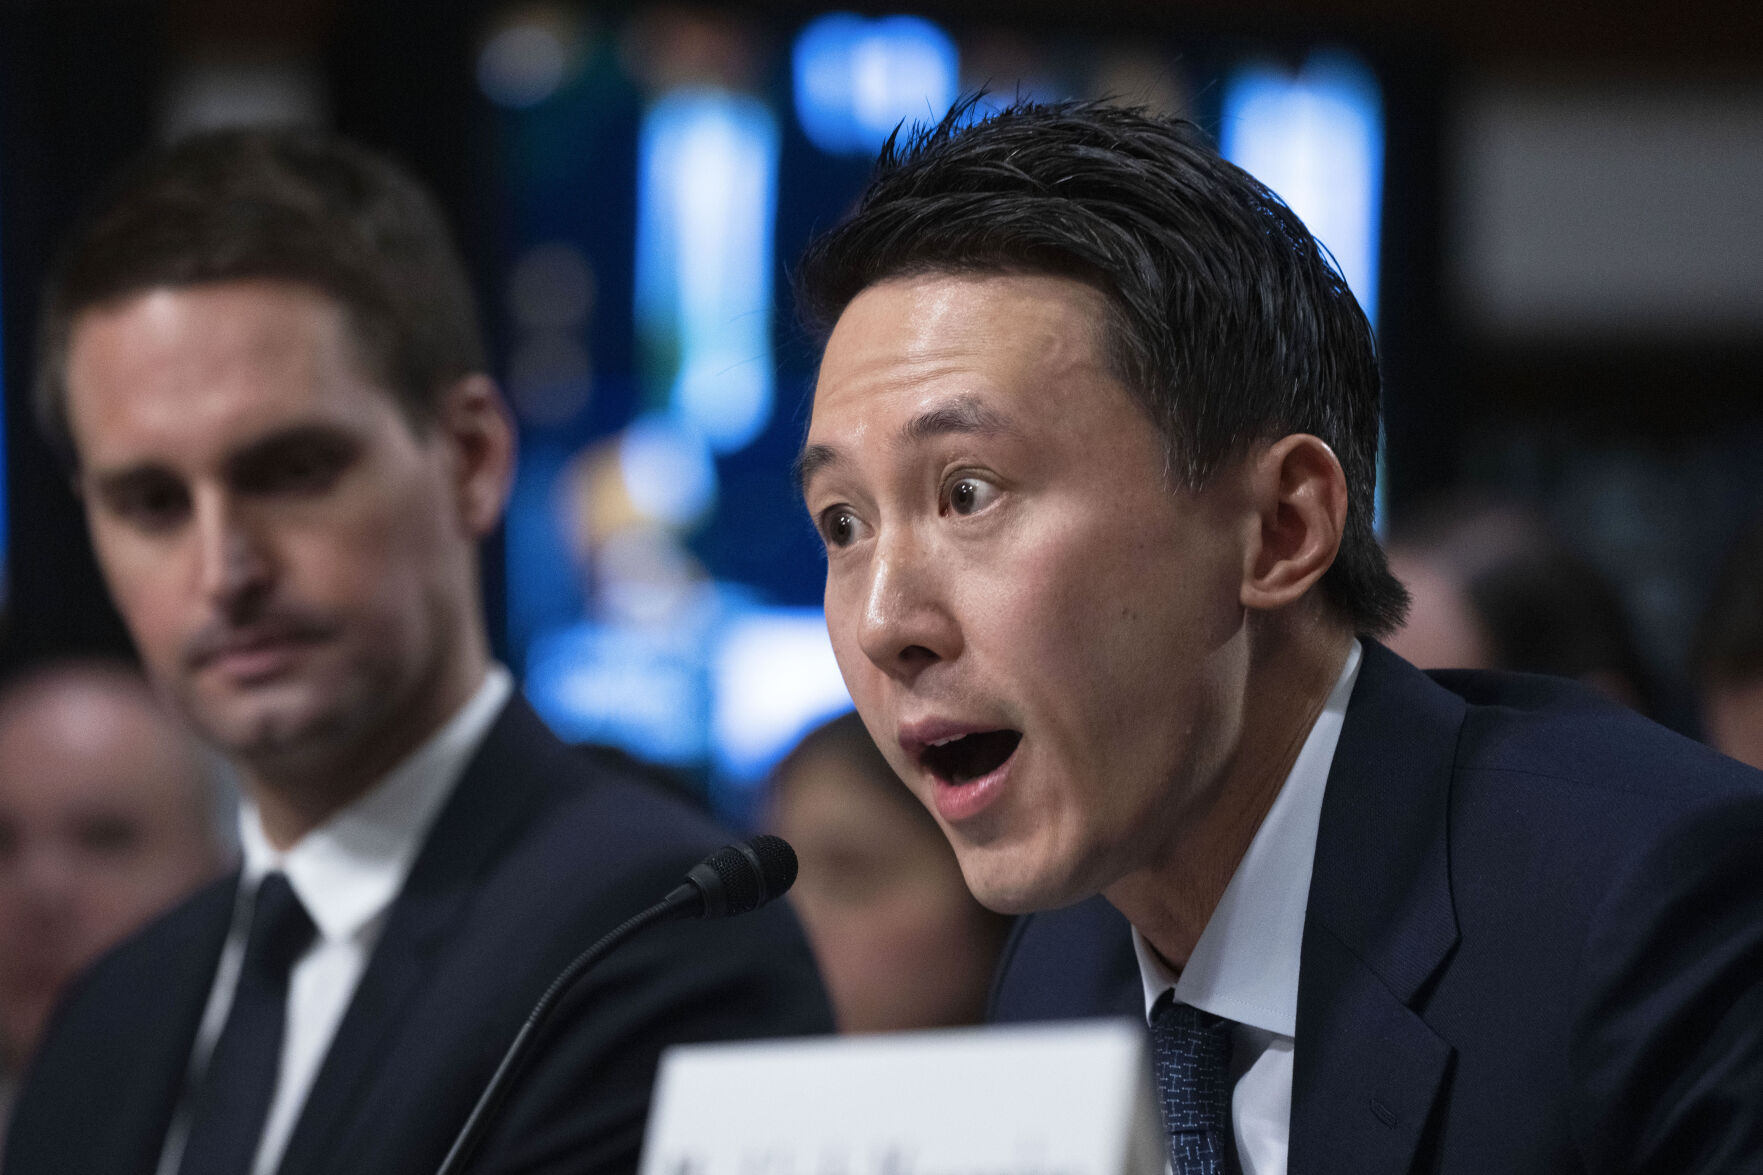 <p>TikTok CEO Shou Zi Chew, testifies during a Senate Judiciary Committee hearing on Capitol Hill in Washington, Wednesday, Jan. 31, 2024, on child safety. Snap CEO Evan Spiegel, left, listens.(AP Photo/Manuel Balce Ceneta)</p>   PHOTO CREDIT: Manuel Balce Ceneta - staff, ASSOCIATED PRESS